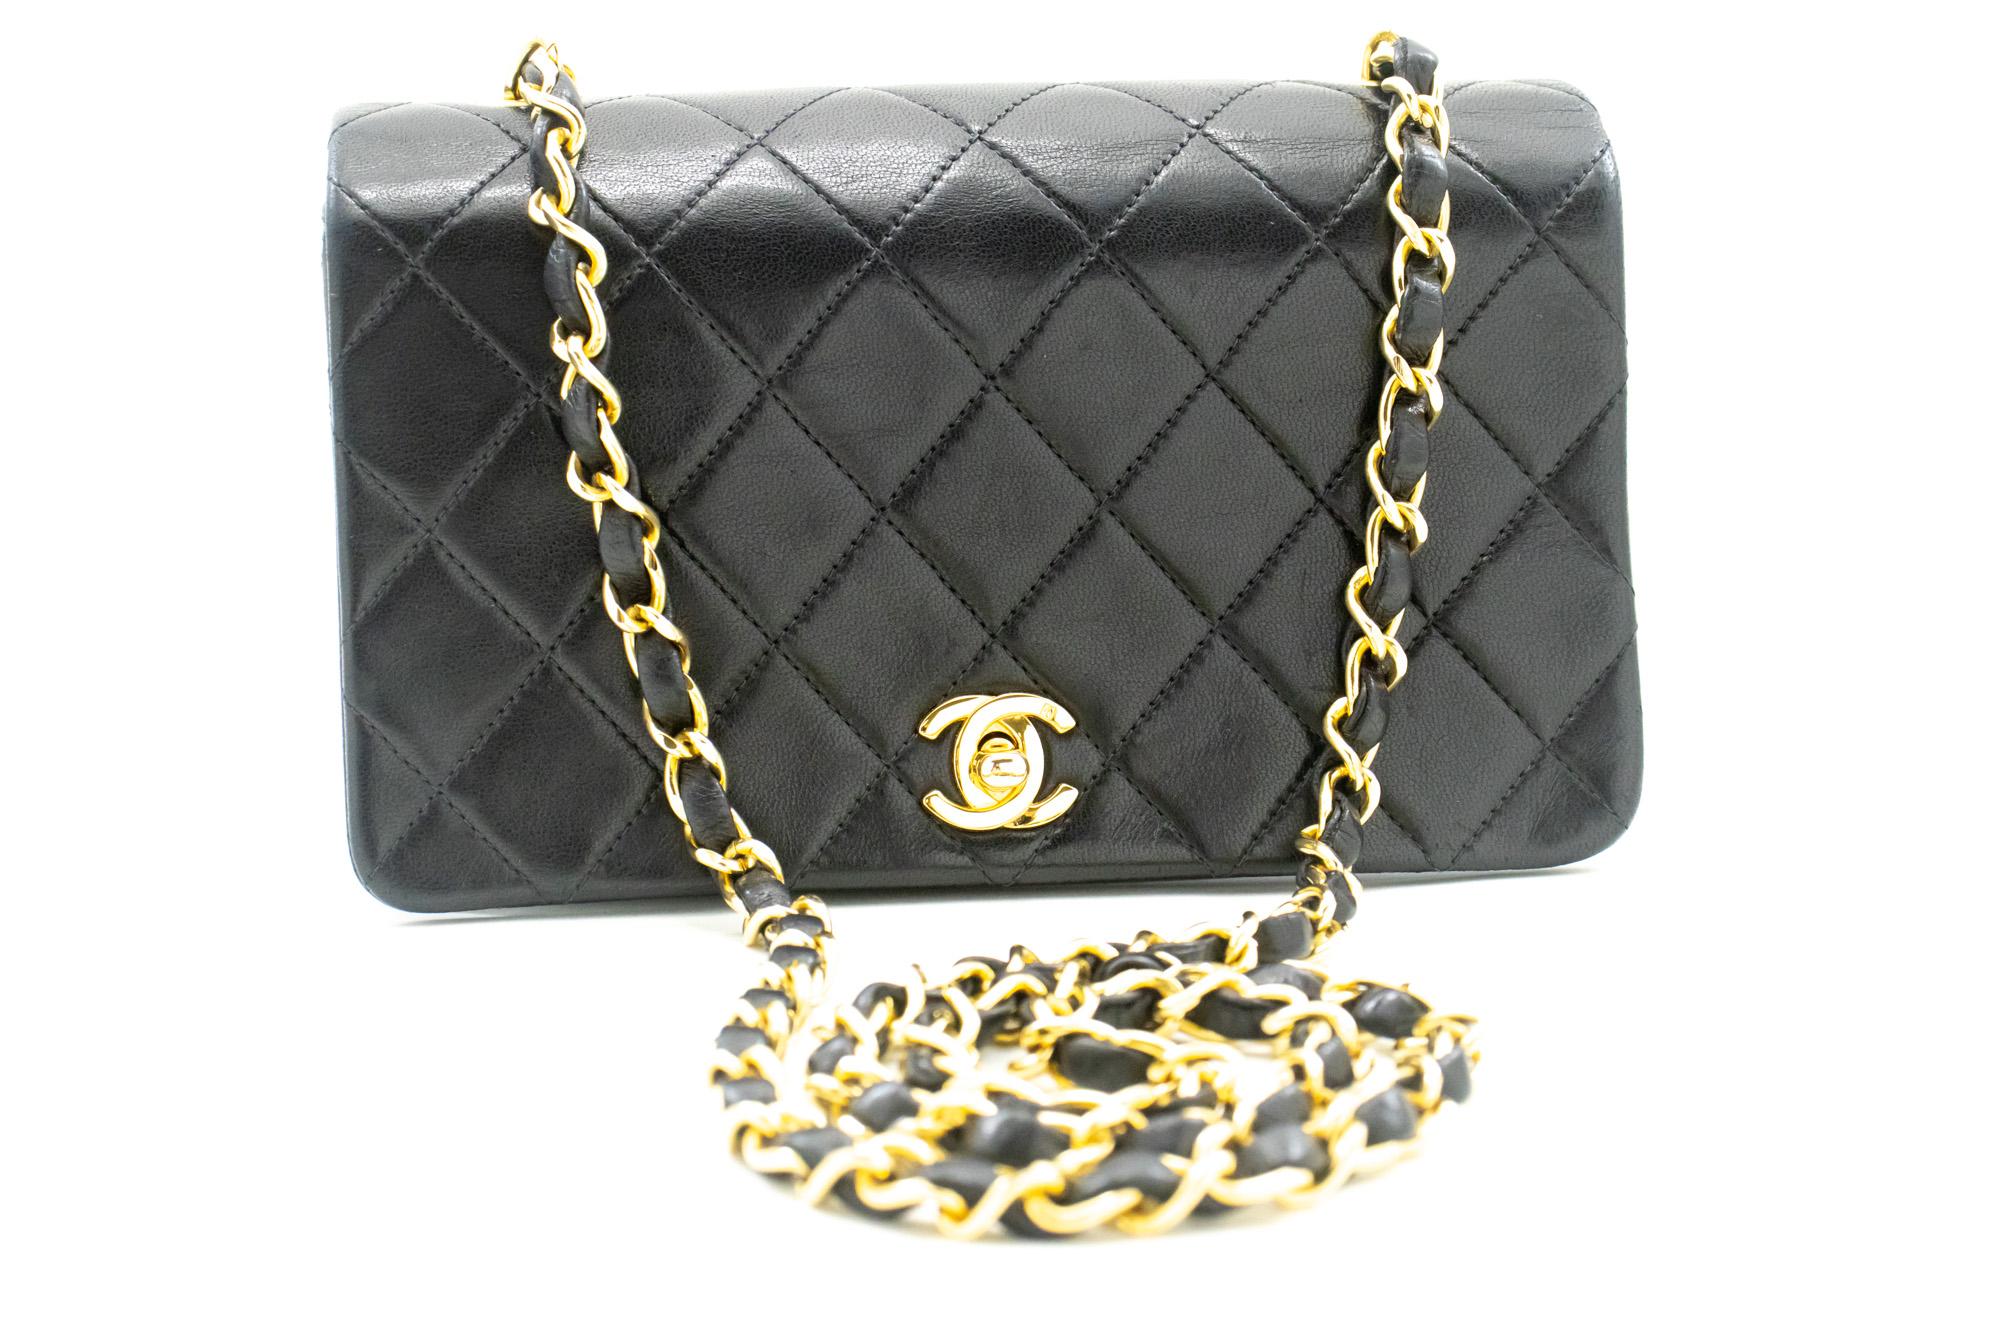 An authentic CHANEL Full Flap Chain Shoulder Bag Crossbody Black made of black Lambskin. The color is Black. The outside material is Leather. The pattern is Solid. This item is Vintage / Classic. The year of manufacture would be